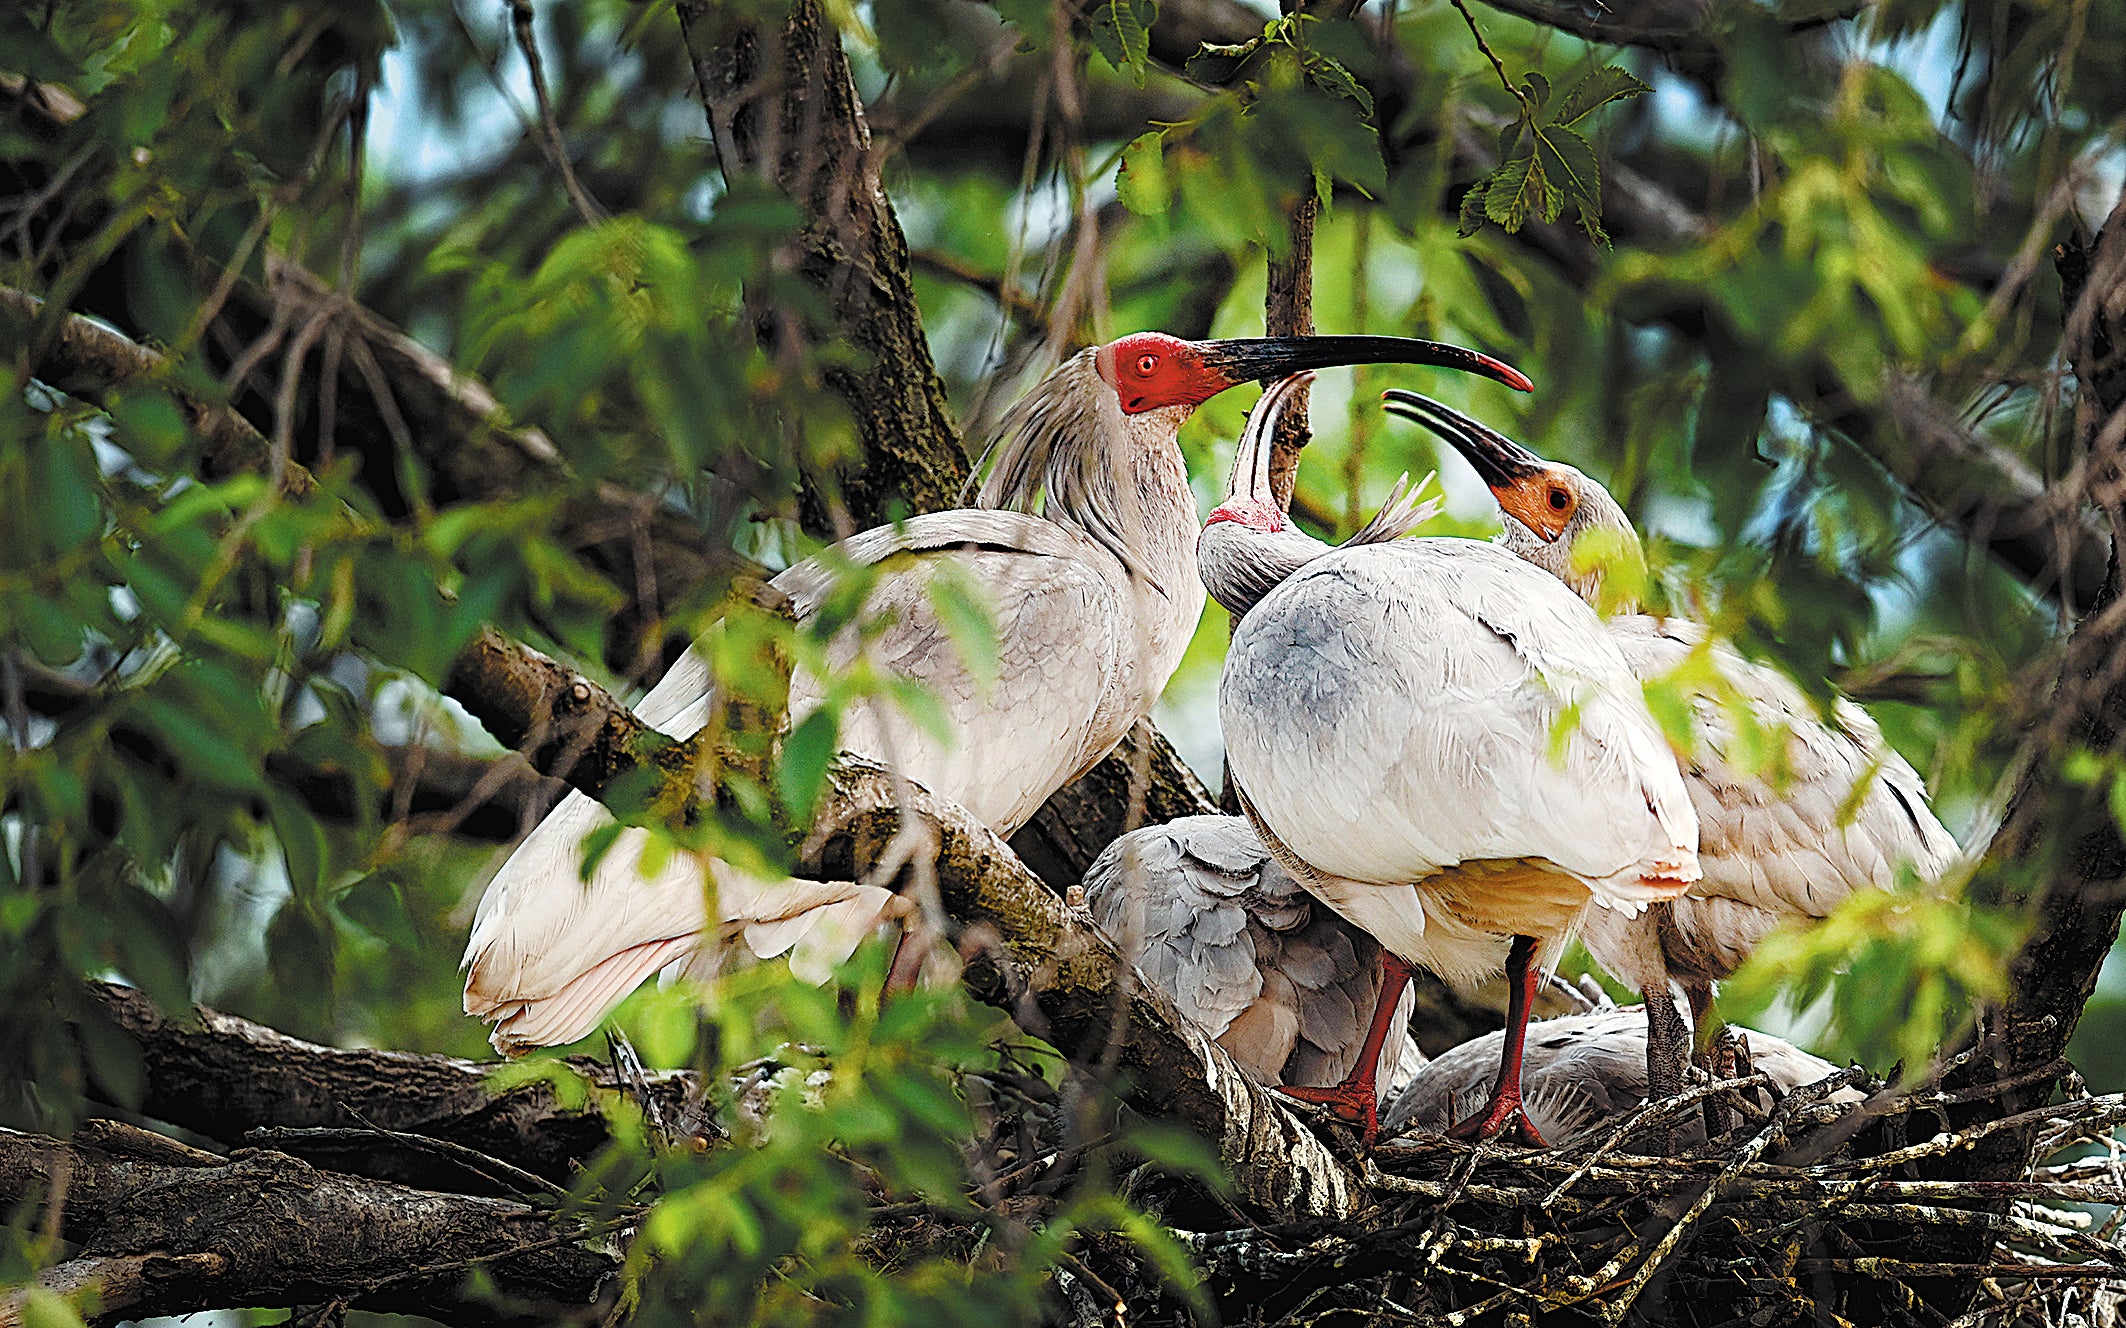 A crested ibis looks after fledglings in Yangxian county, Shaanxi province